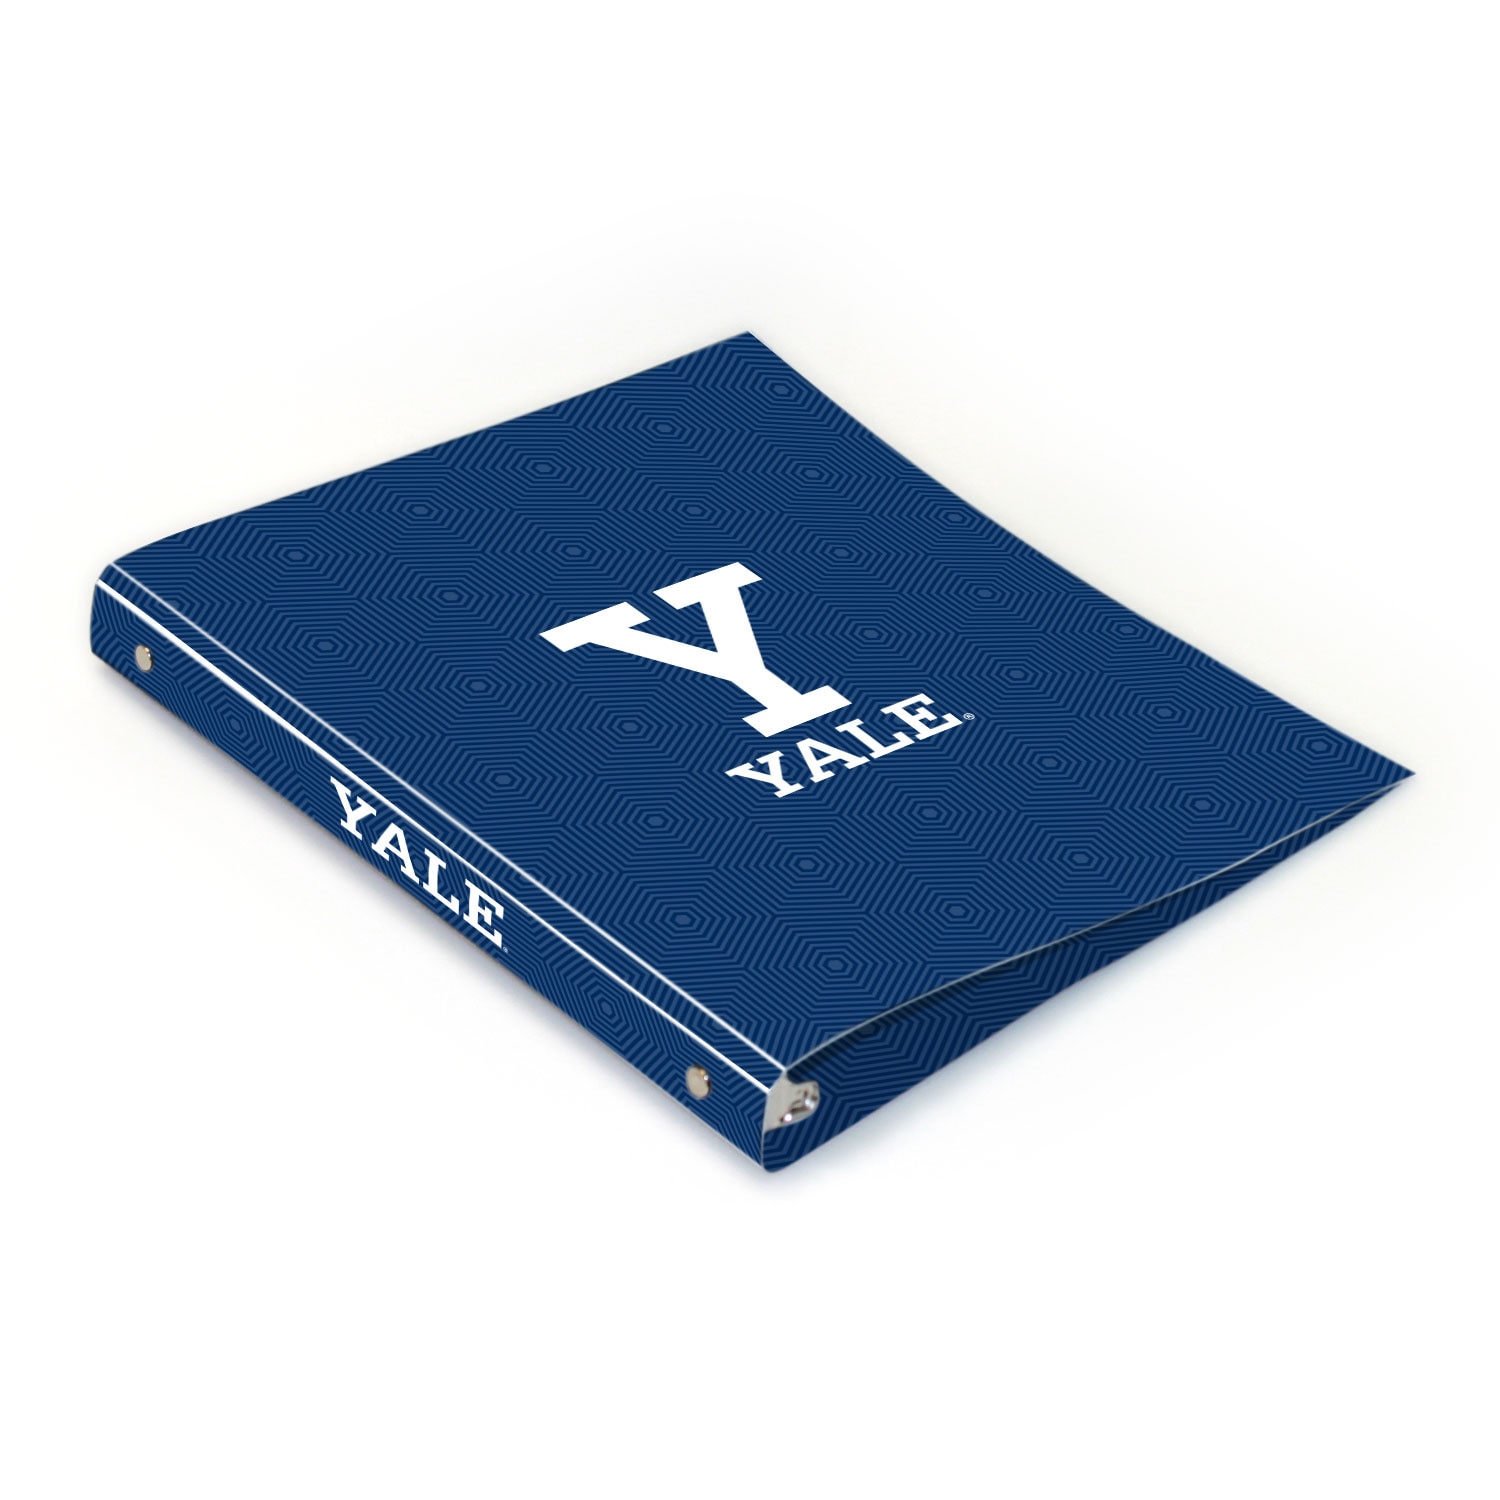 Yale Bookstore Full Color 2 sided Imprinted Flexible 1" Logo 1 Binder 10.5" x 11.5"